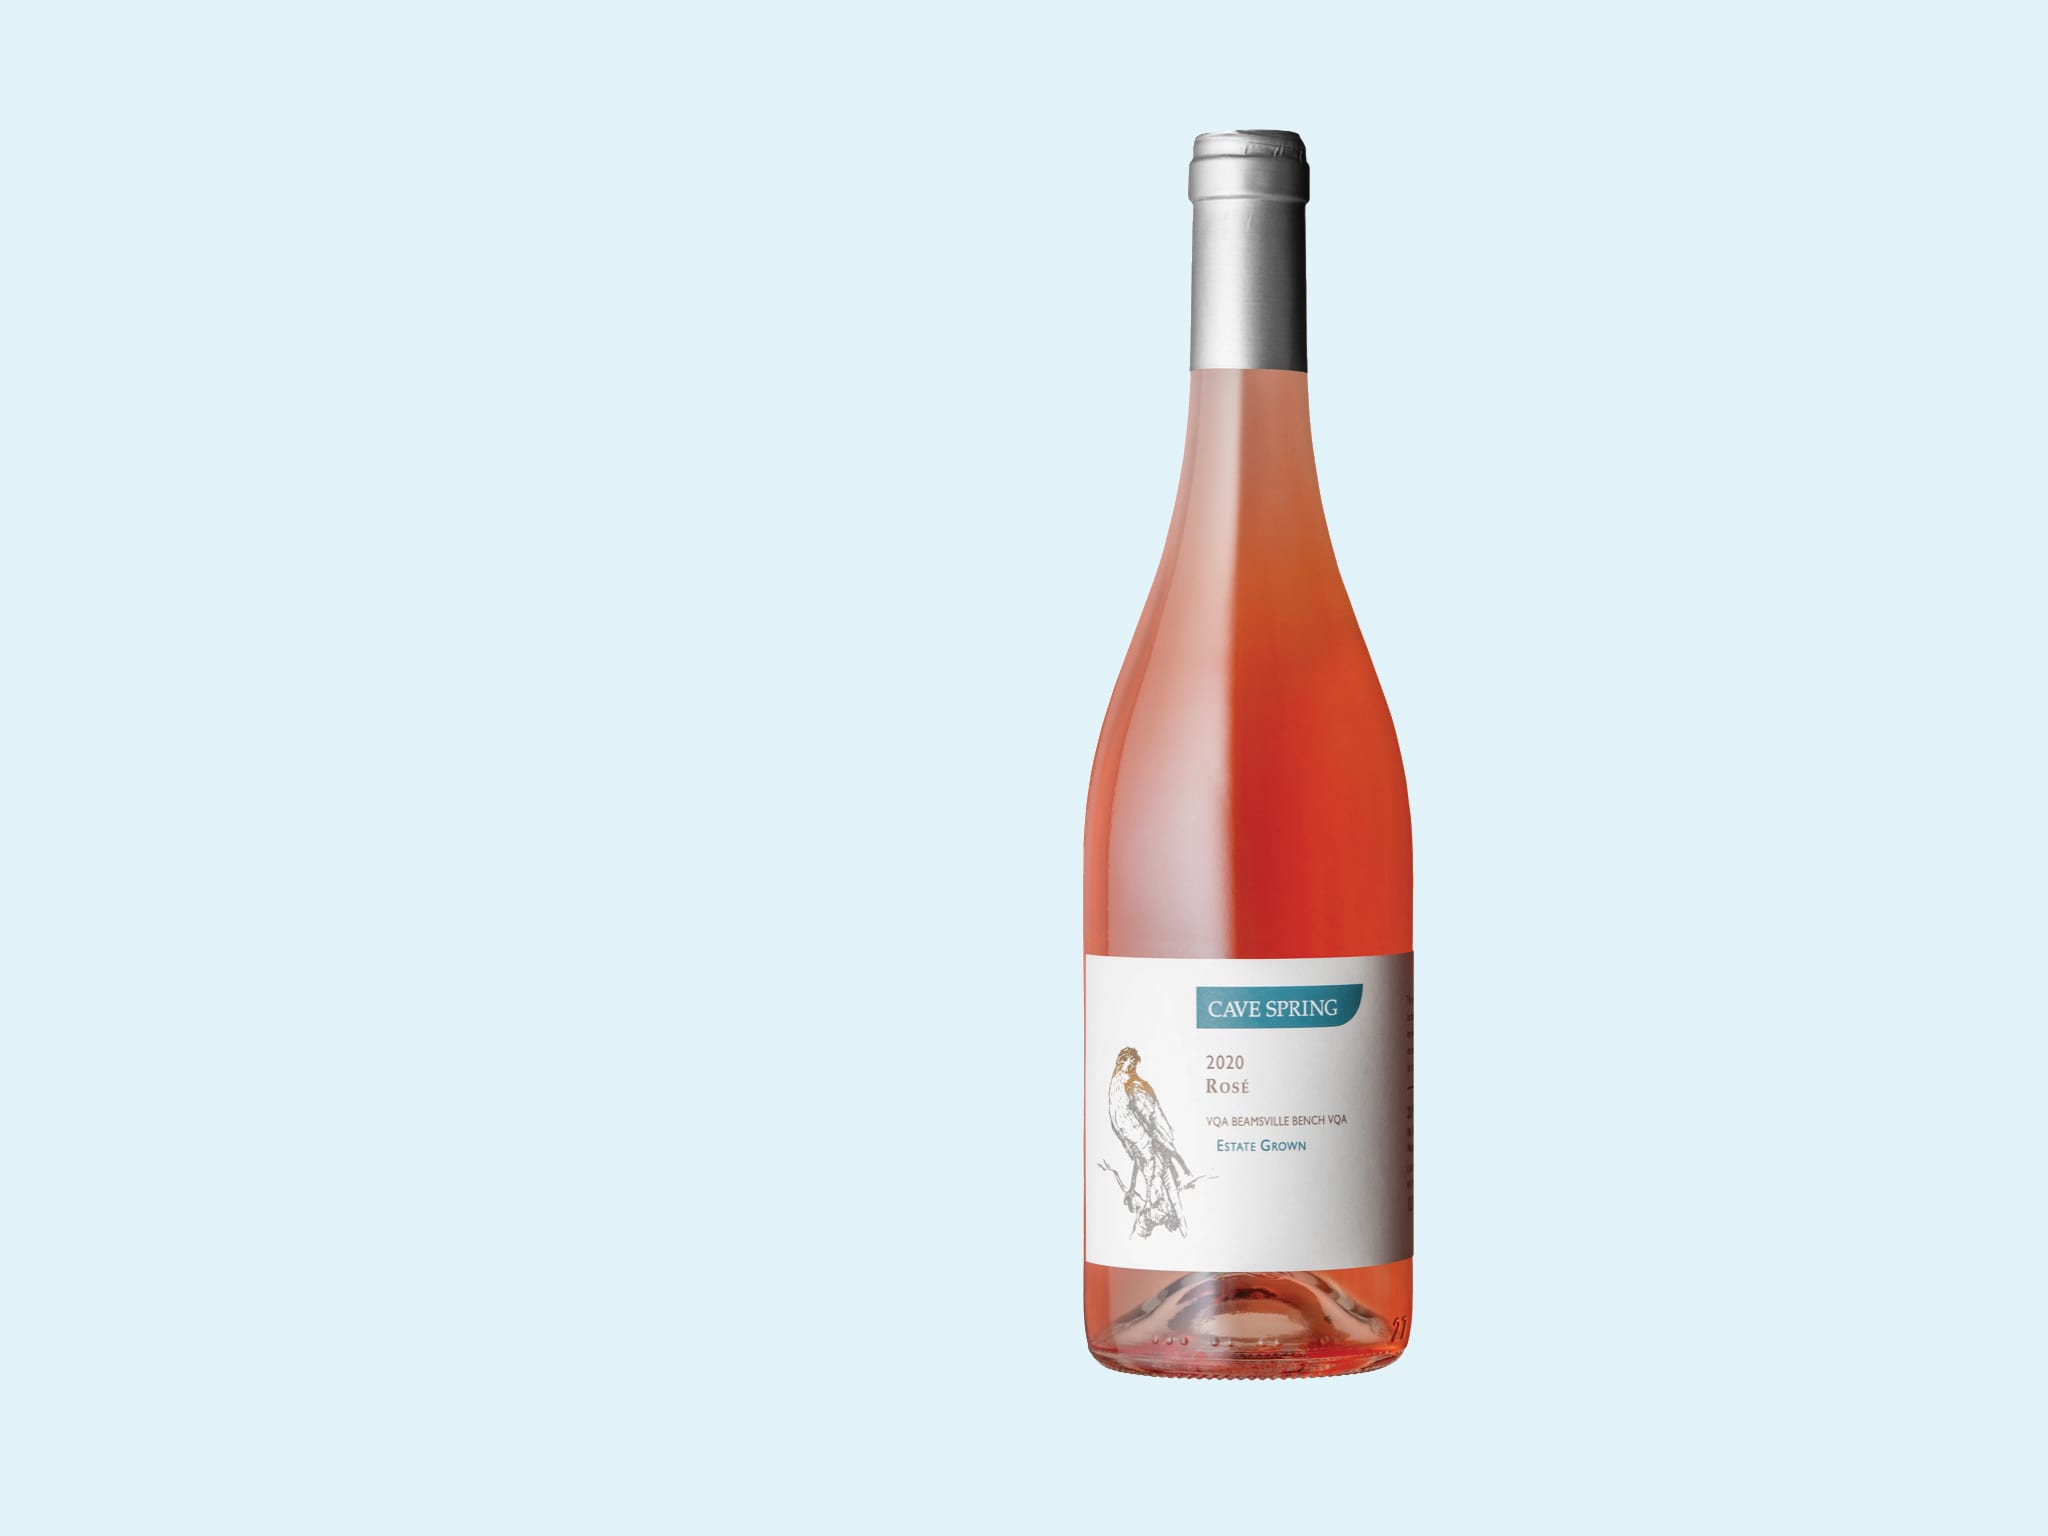 The 2020 Rosé from Niagara’s Cave Spring Vineyard.